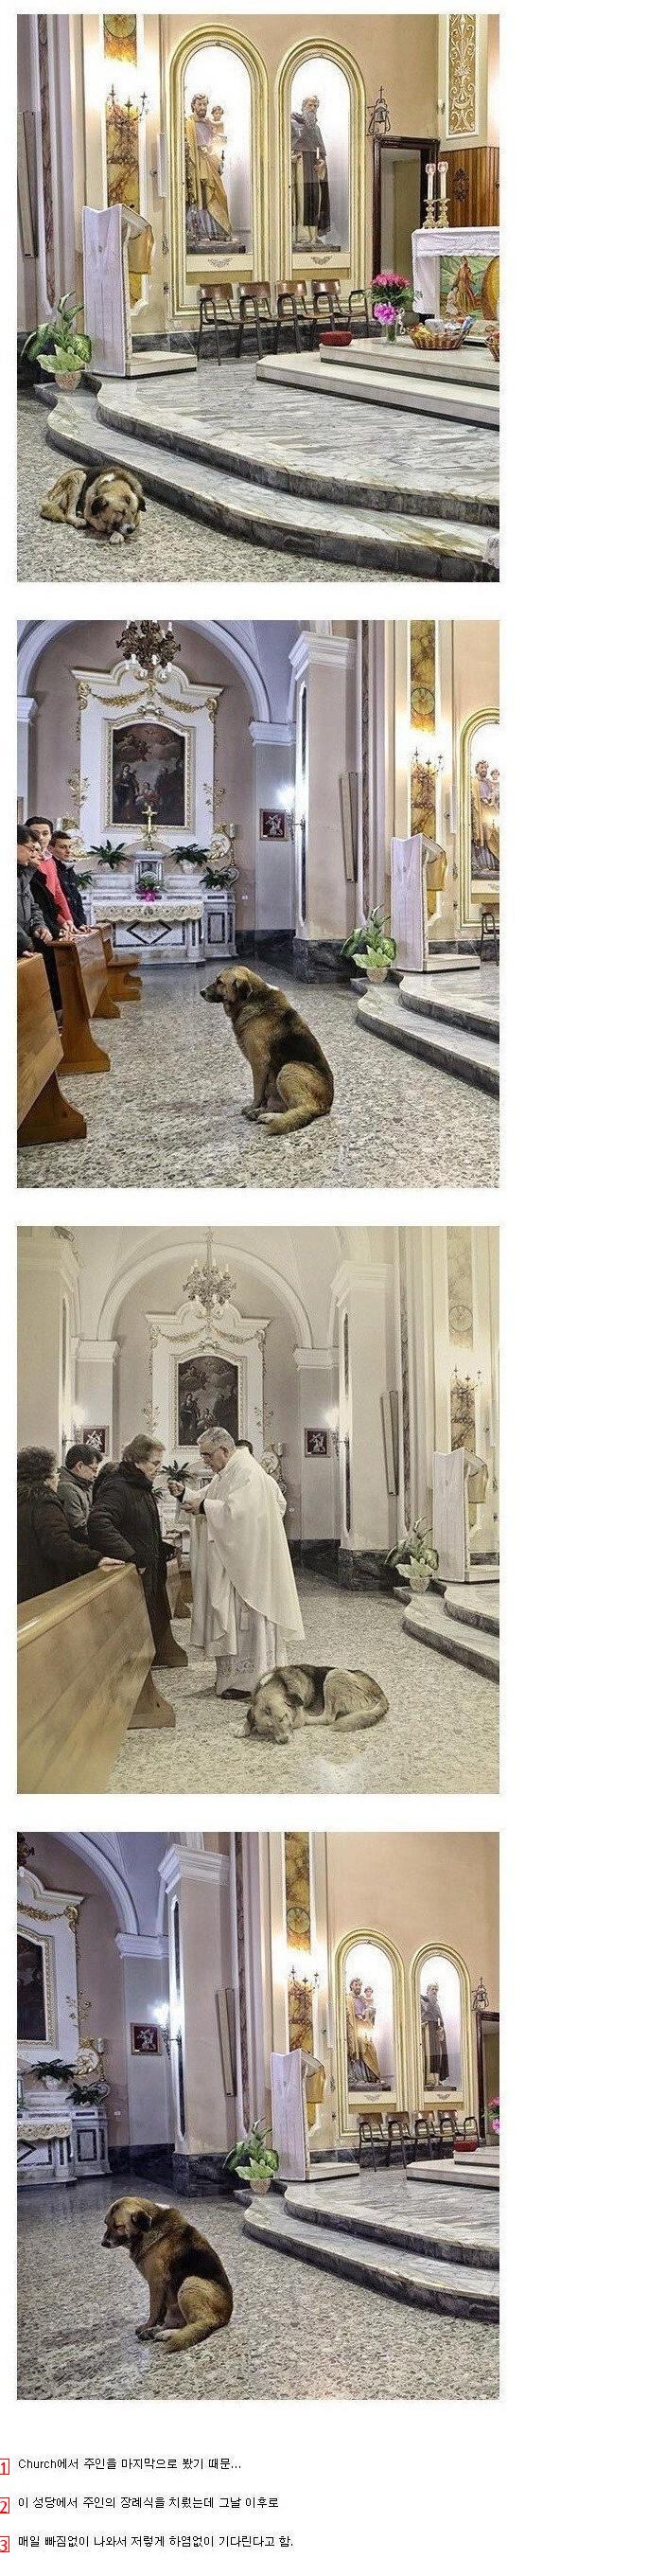 Why a puppy comes to the cathedral every day.jpg